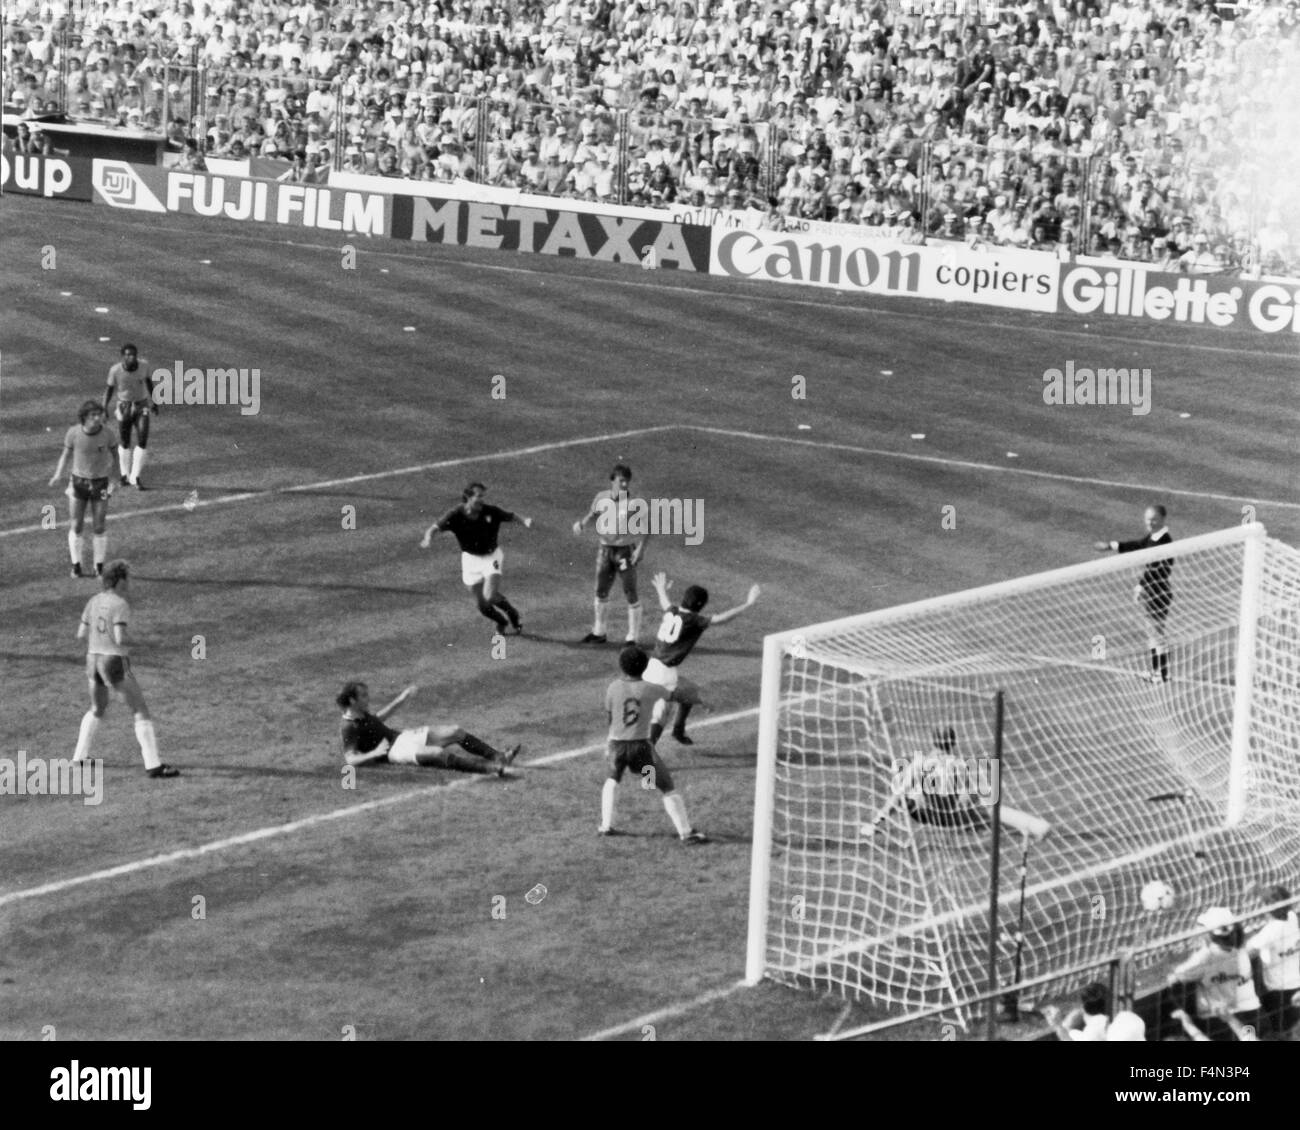 Italy-Brazil World Cup 1982 Stock Photo